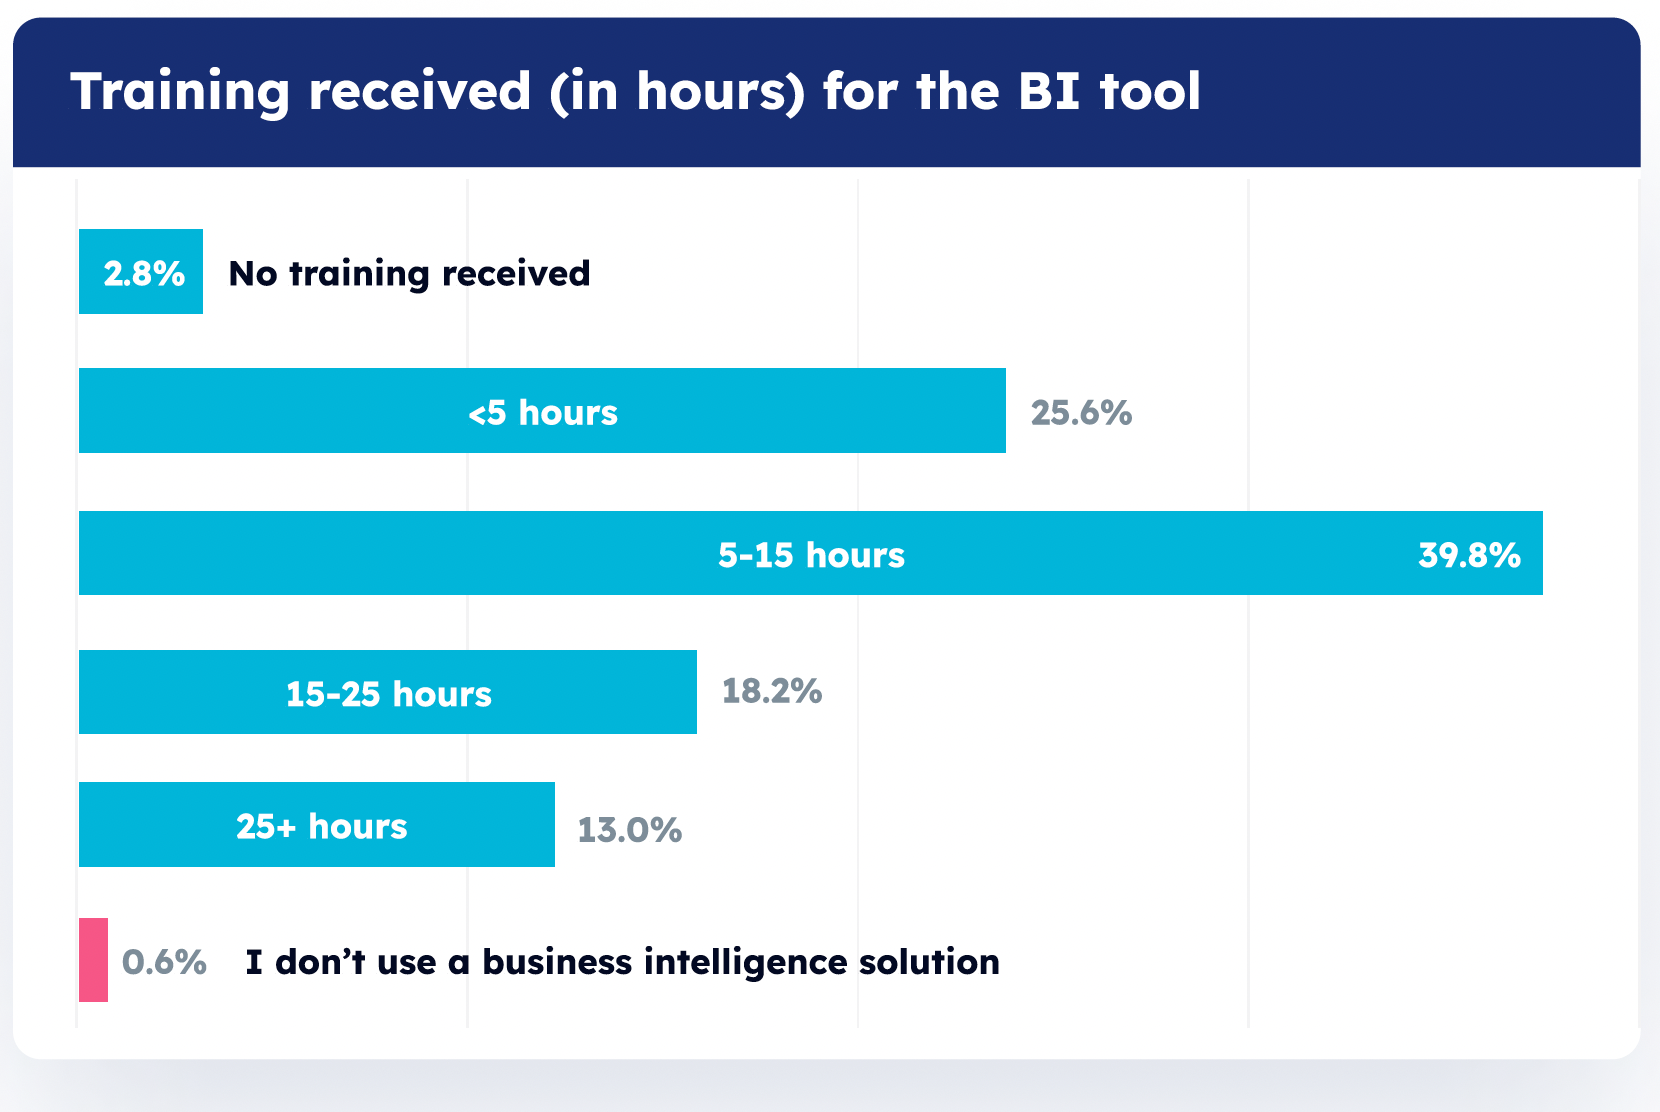 Training received for BI tool